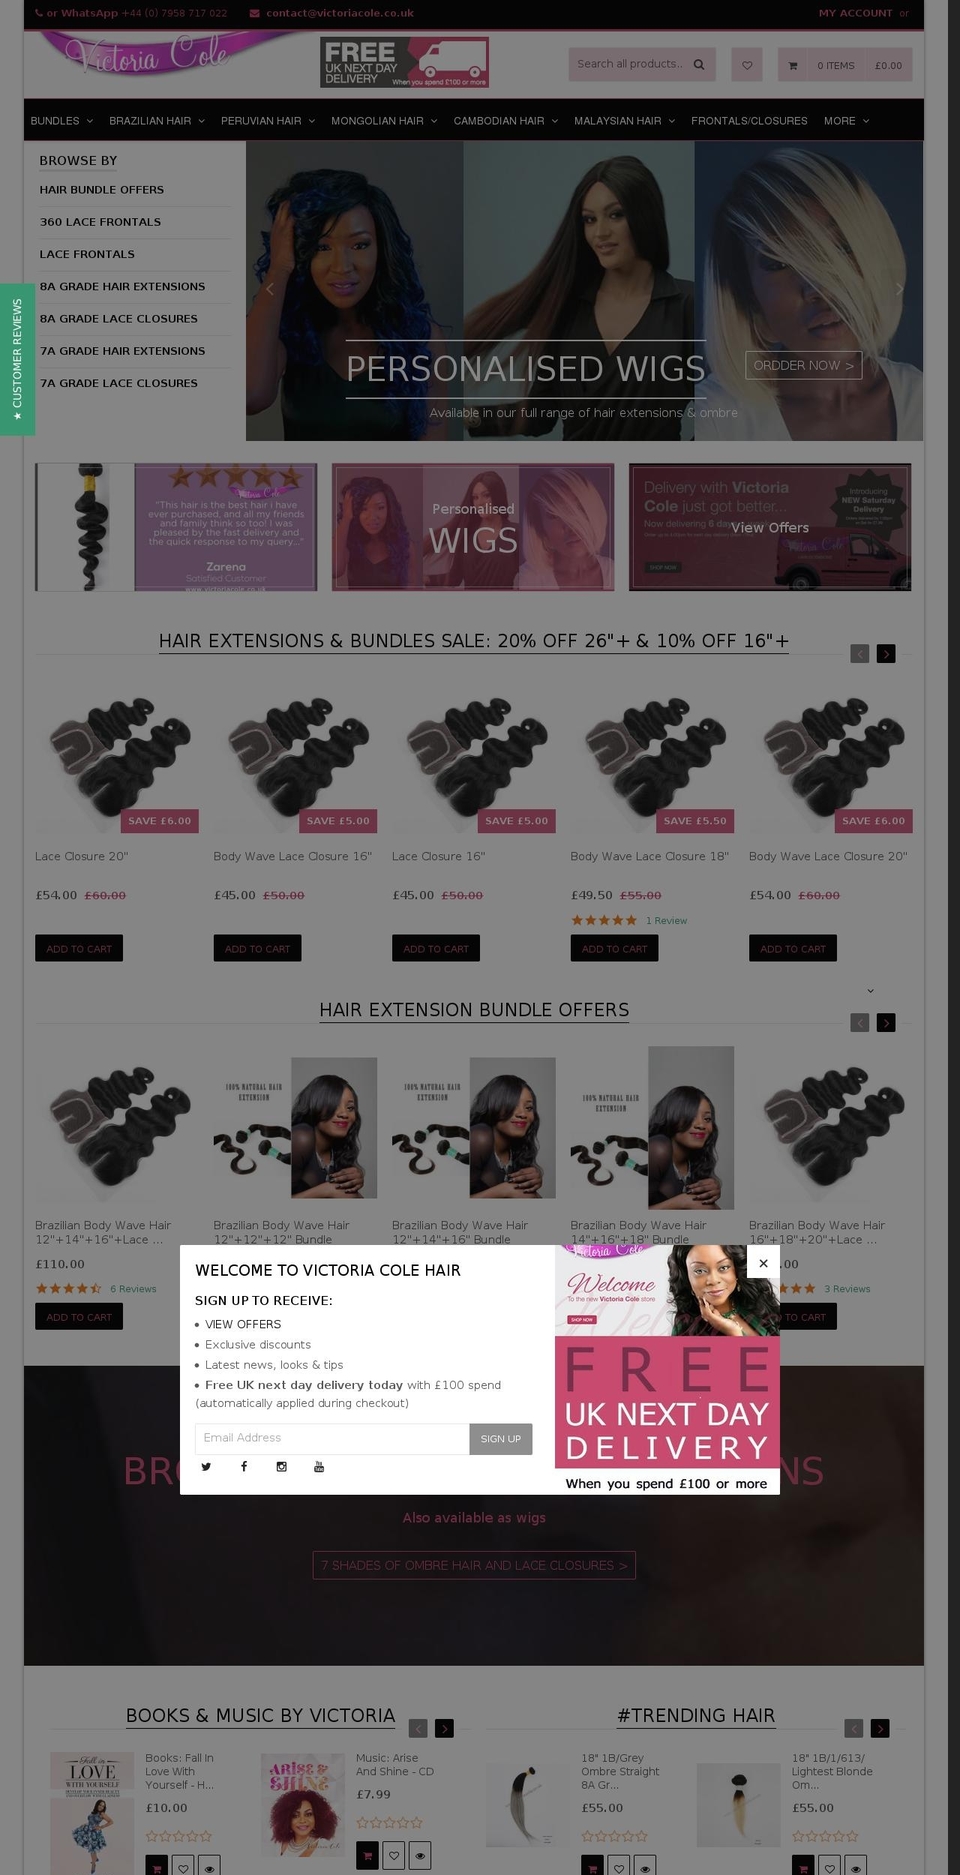 BoldSupport-11-18-16 qrack-v115 Shopify theme site example victoriacolehair.com